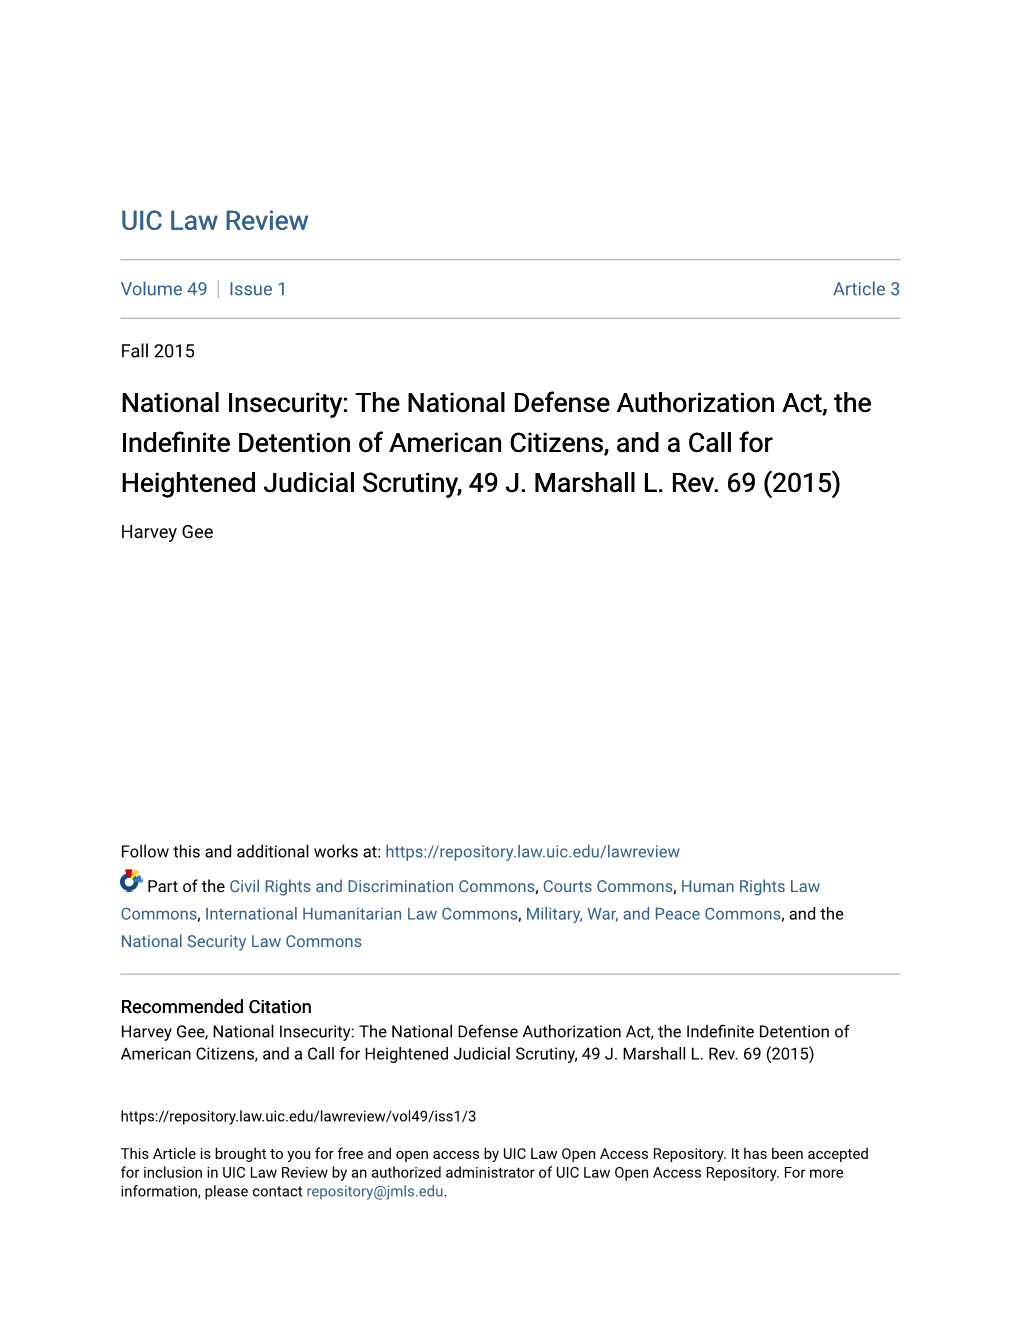 The National Defense Authorization Act, the Indefinite Detention of American Citizens, and a Call for Heightened Judicial Scrutiny, 49 J